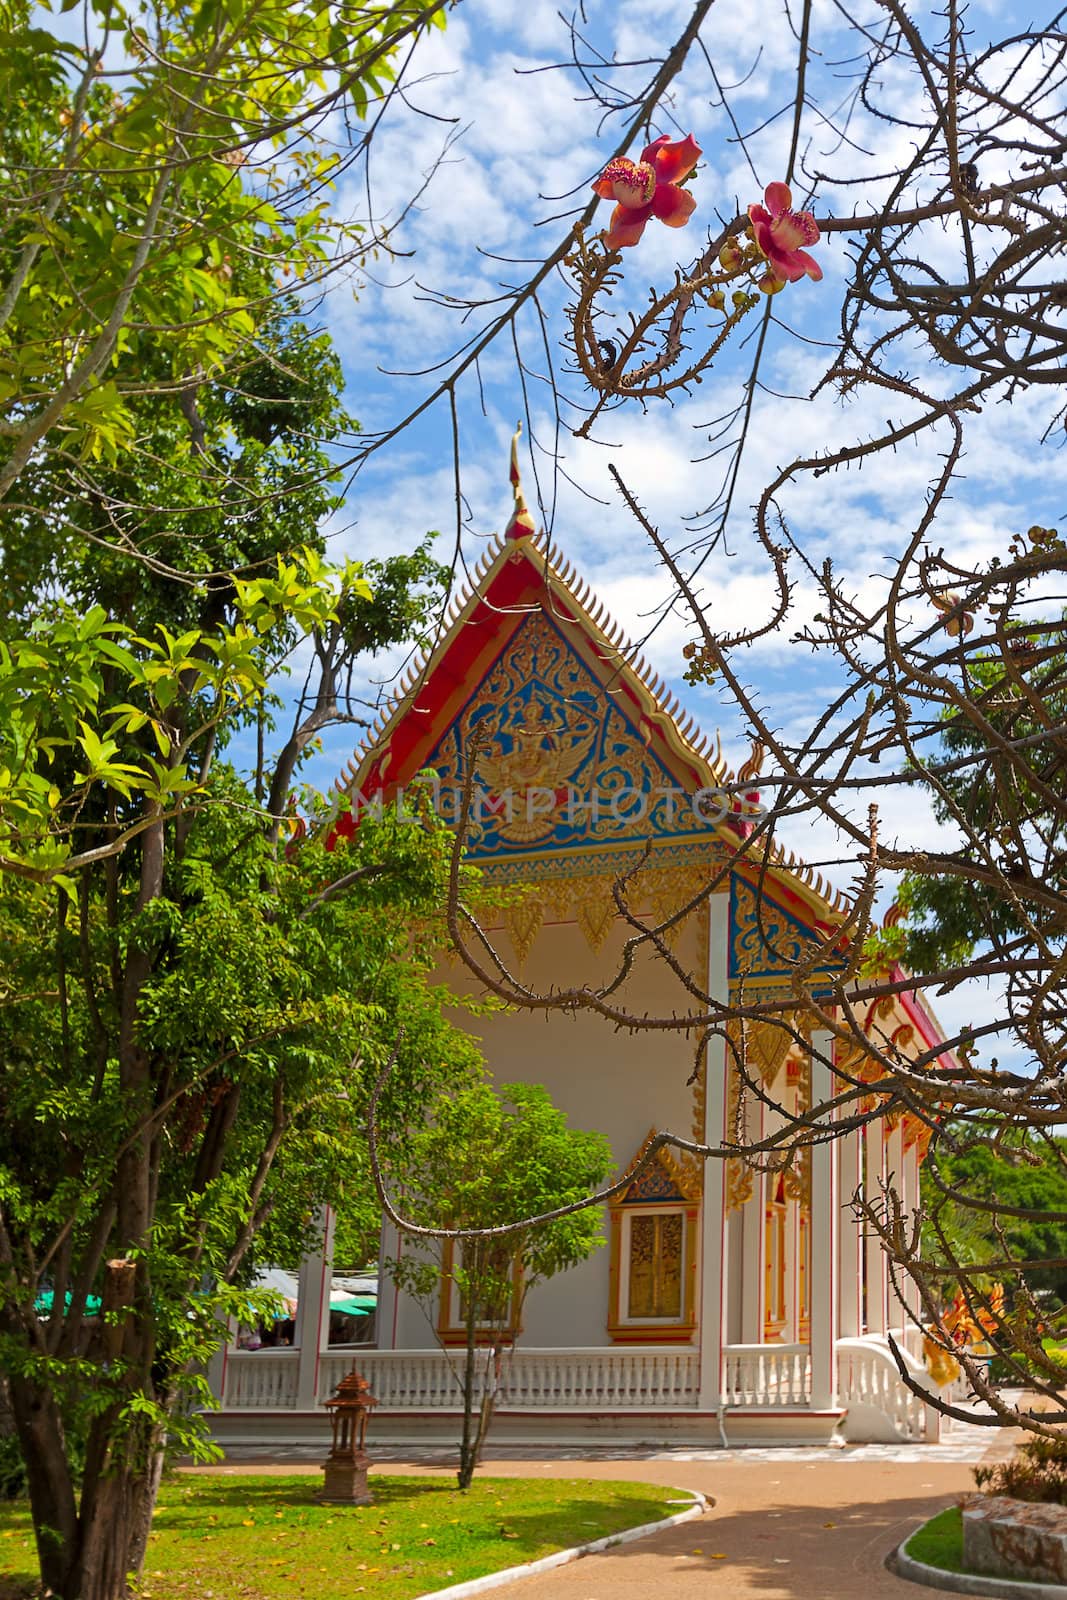 Buddhist temple through  branches of trees against  blue sky, Thailand.